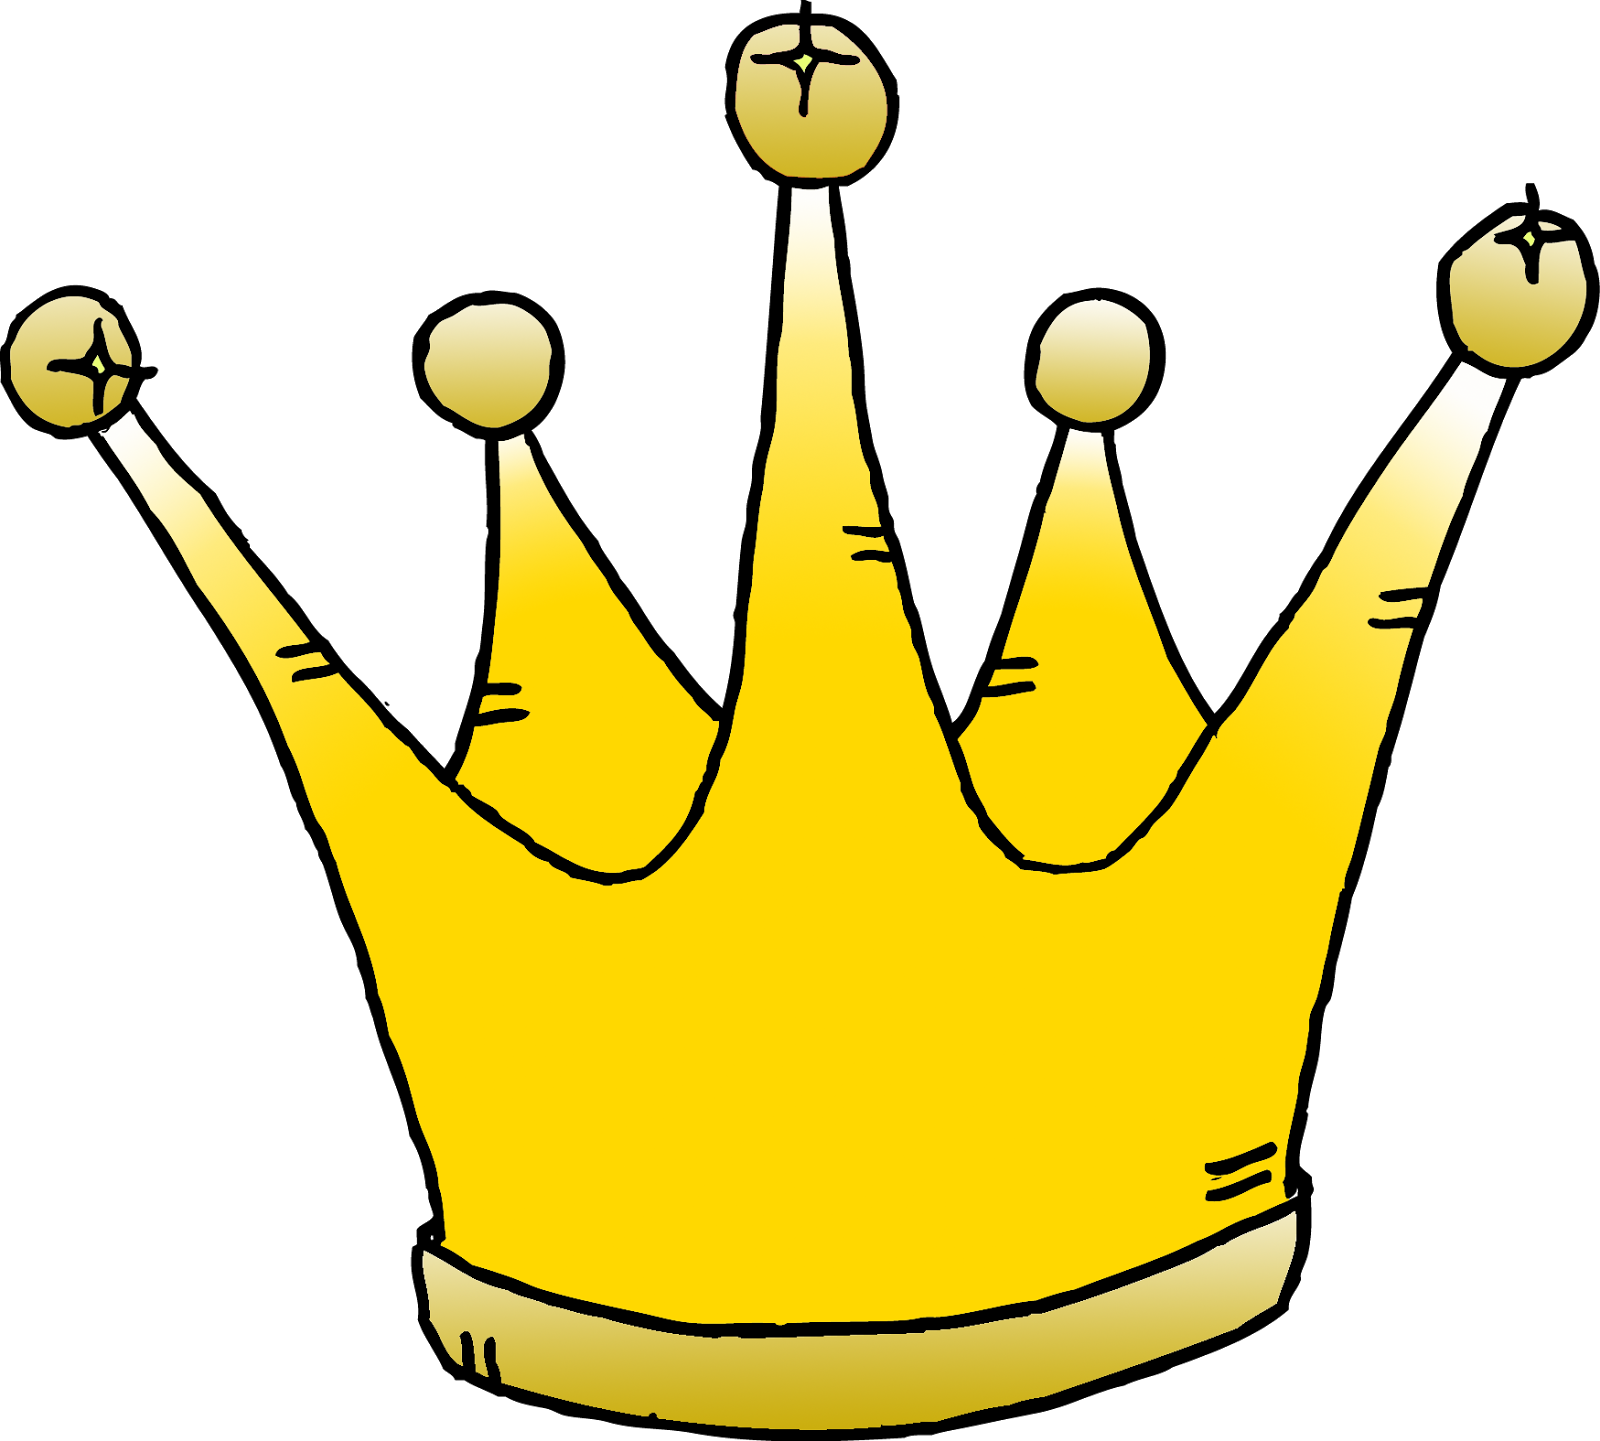 Pencil and in color. Clipart crown fairytale